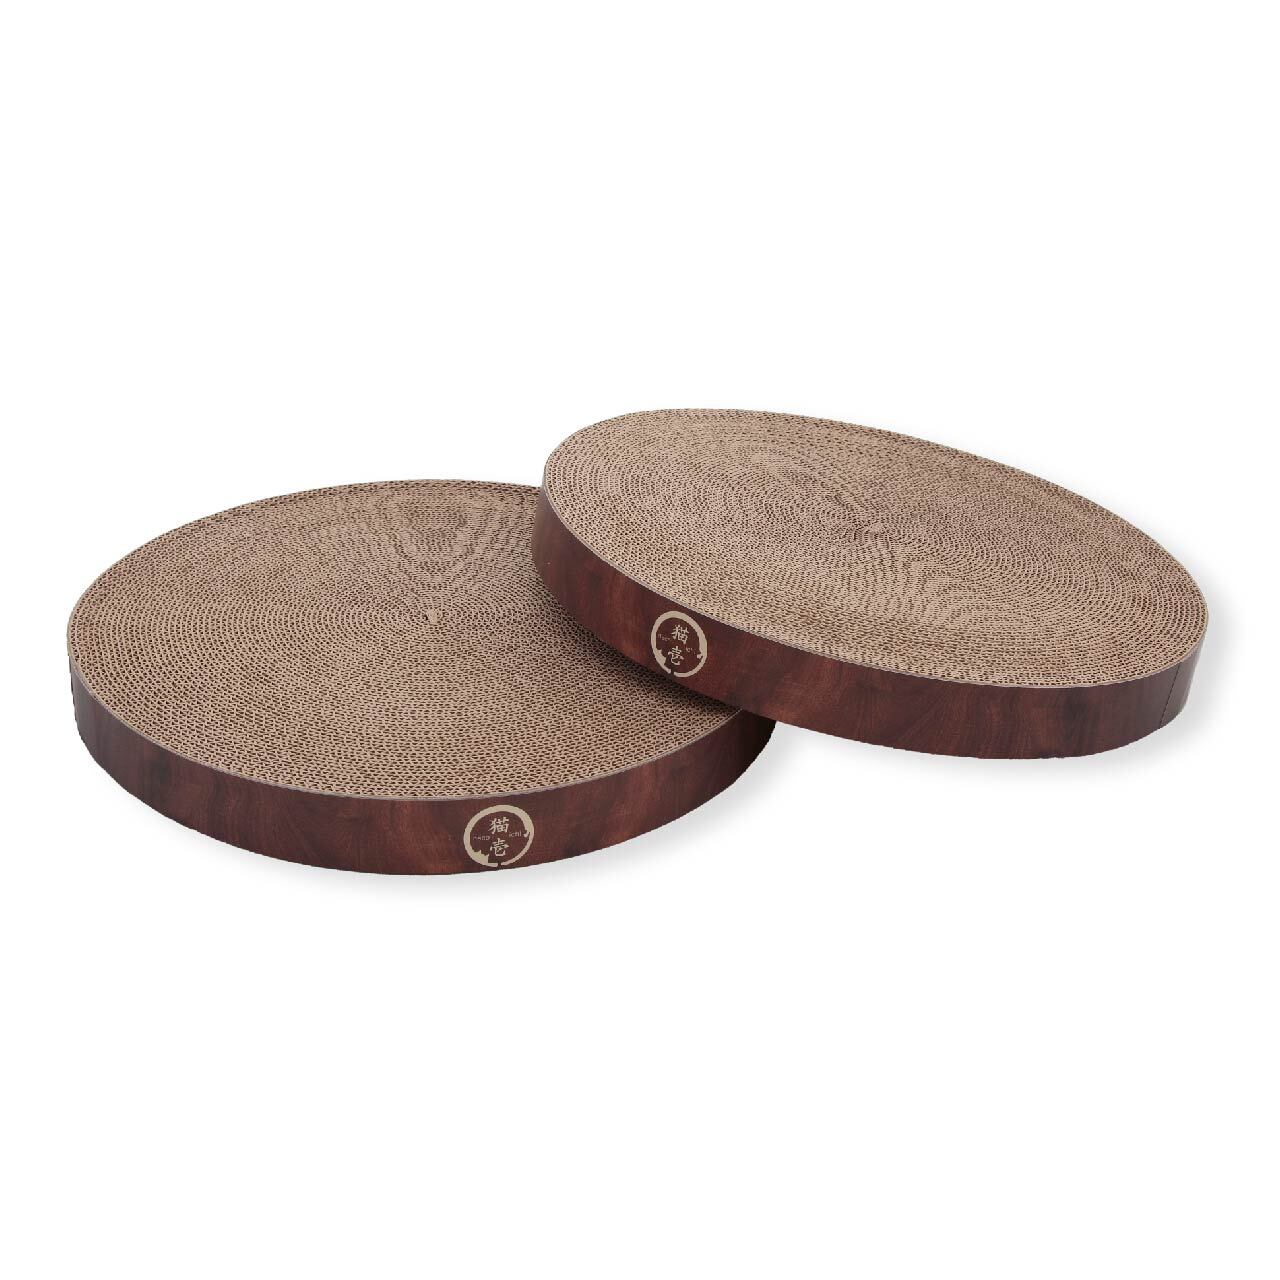 Cozy Cat Scratcher Bowl Replacement Pad (Dark Cherry, 2 pack)